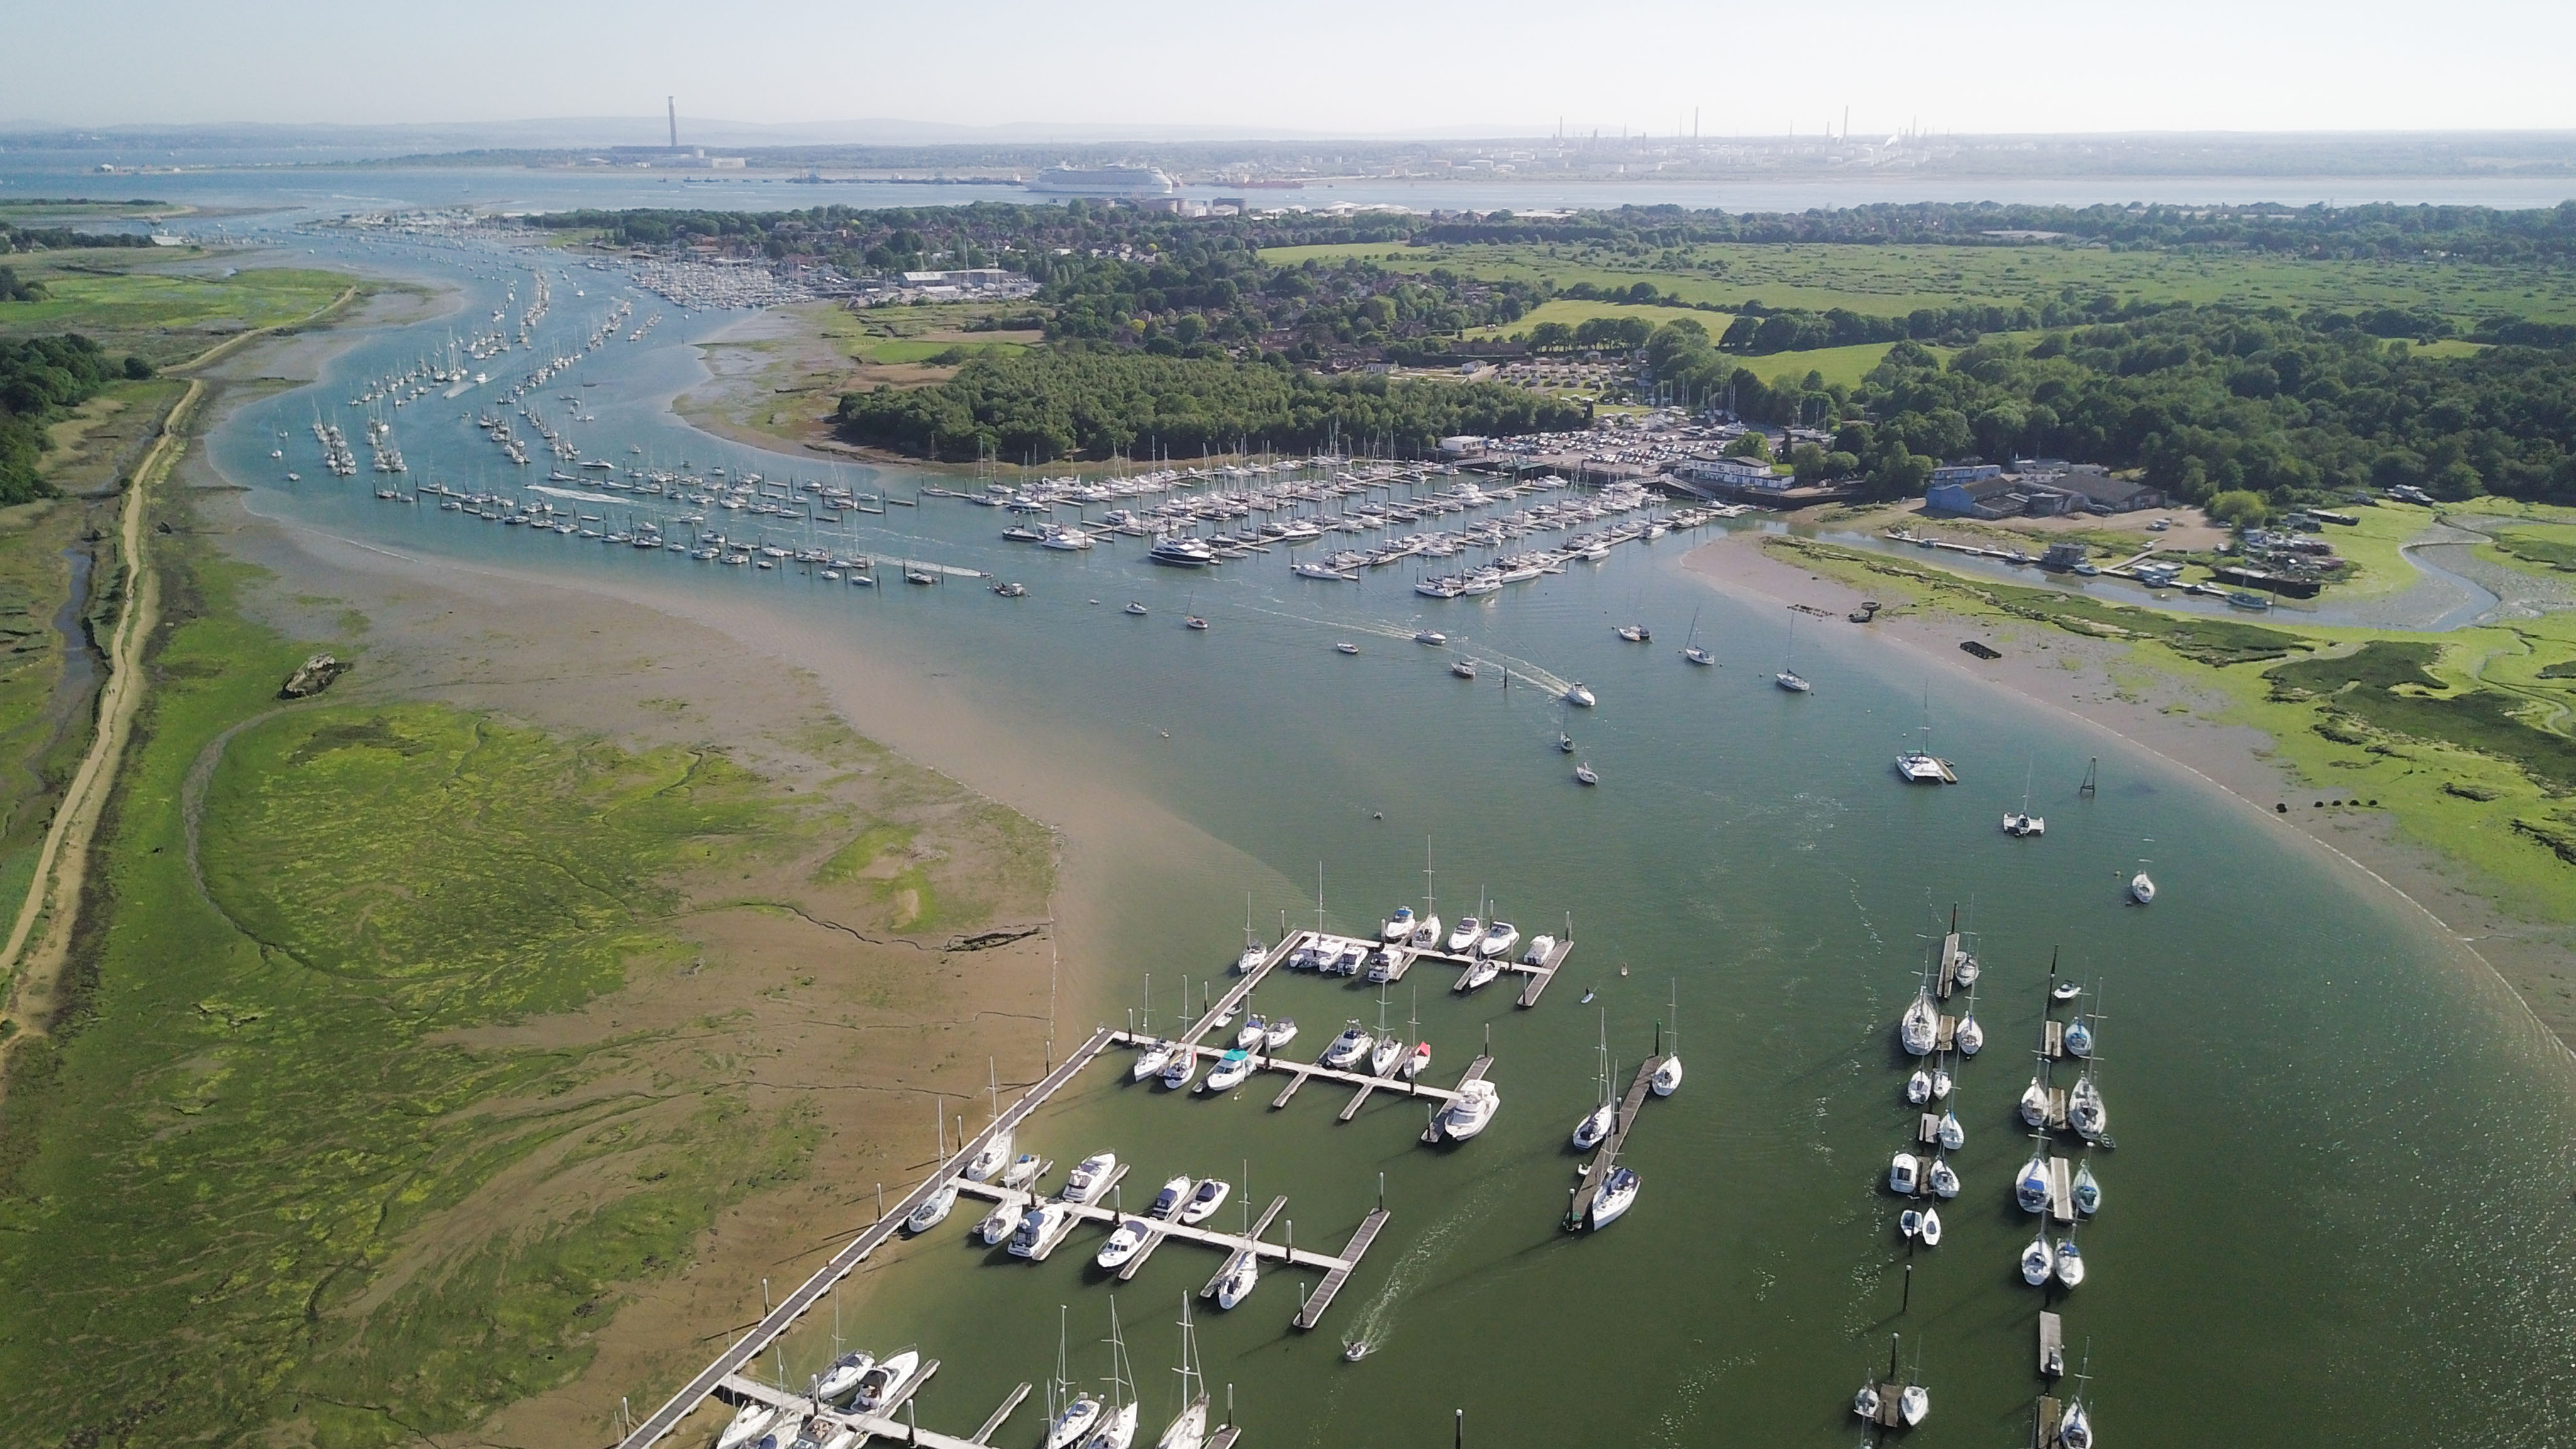 Aerial view of boats on the river Hamble, Southampton, UK